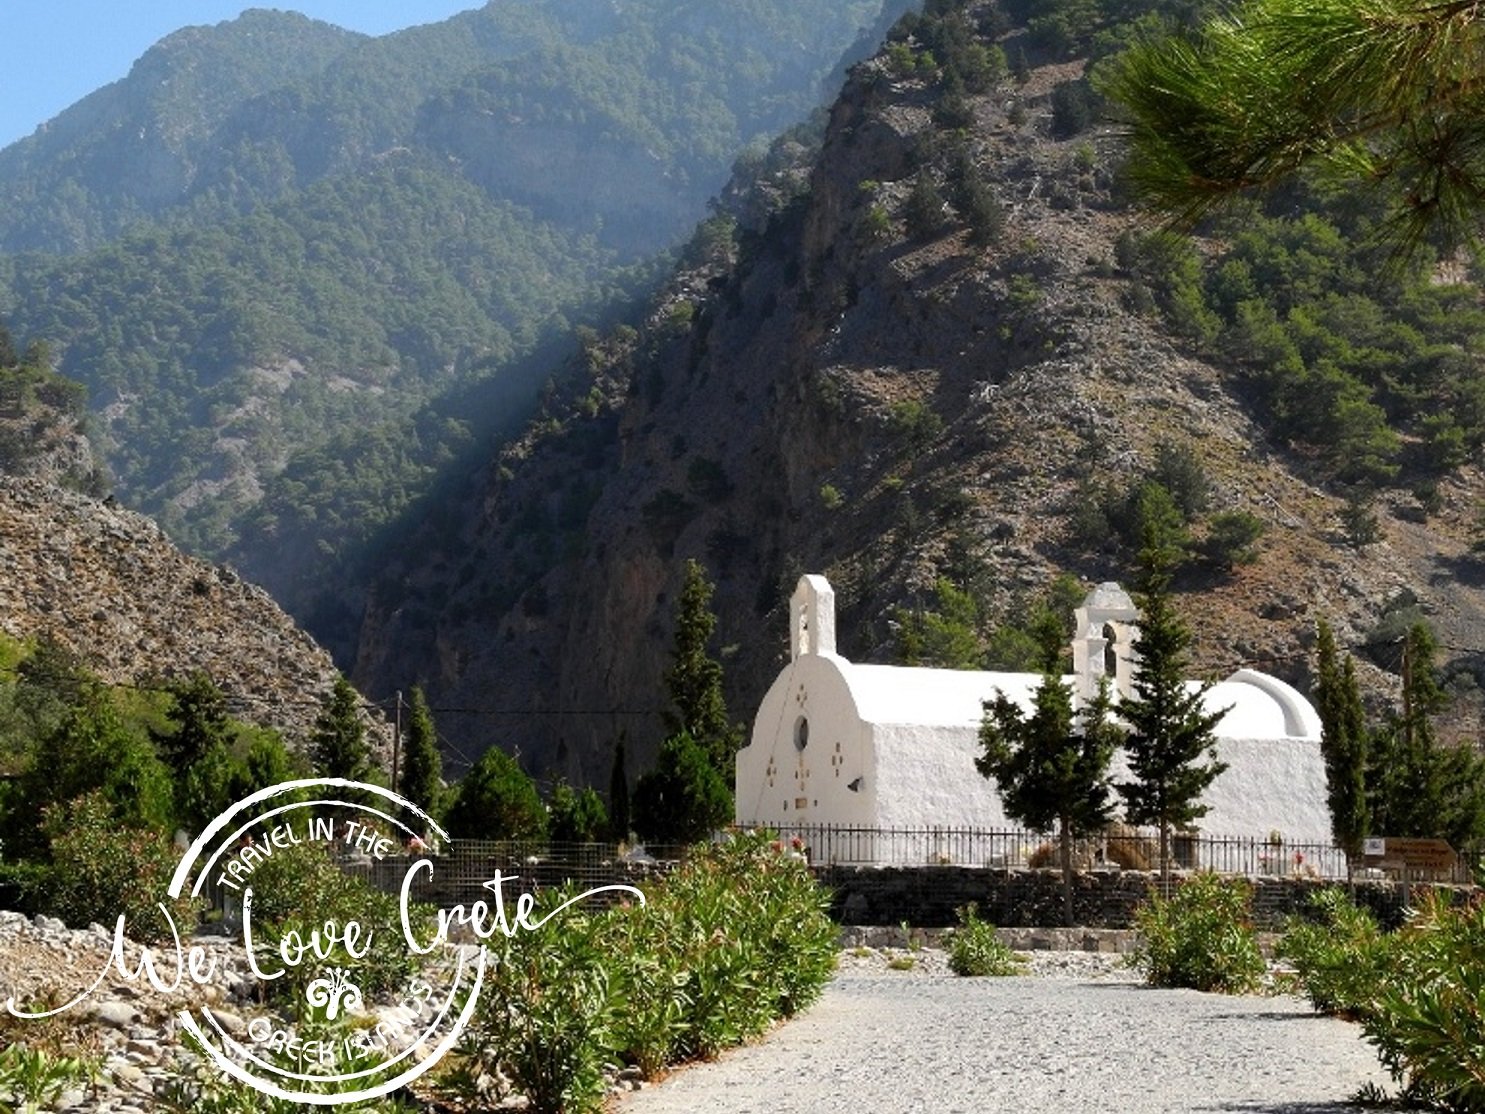 Take the Samaria Gorge journey on foot - experience the majesty of nature